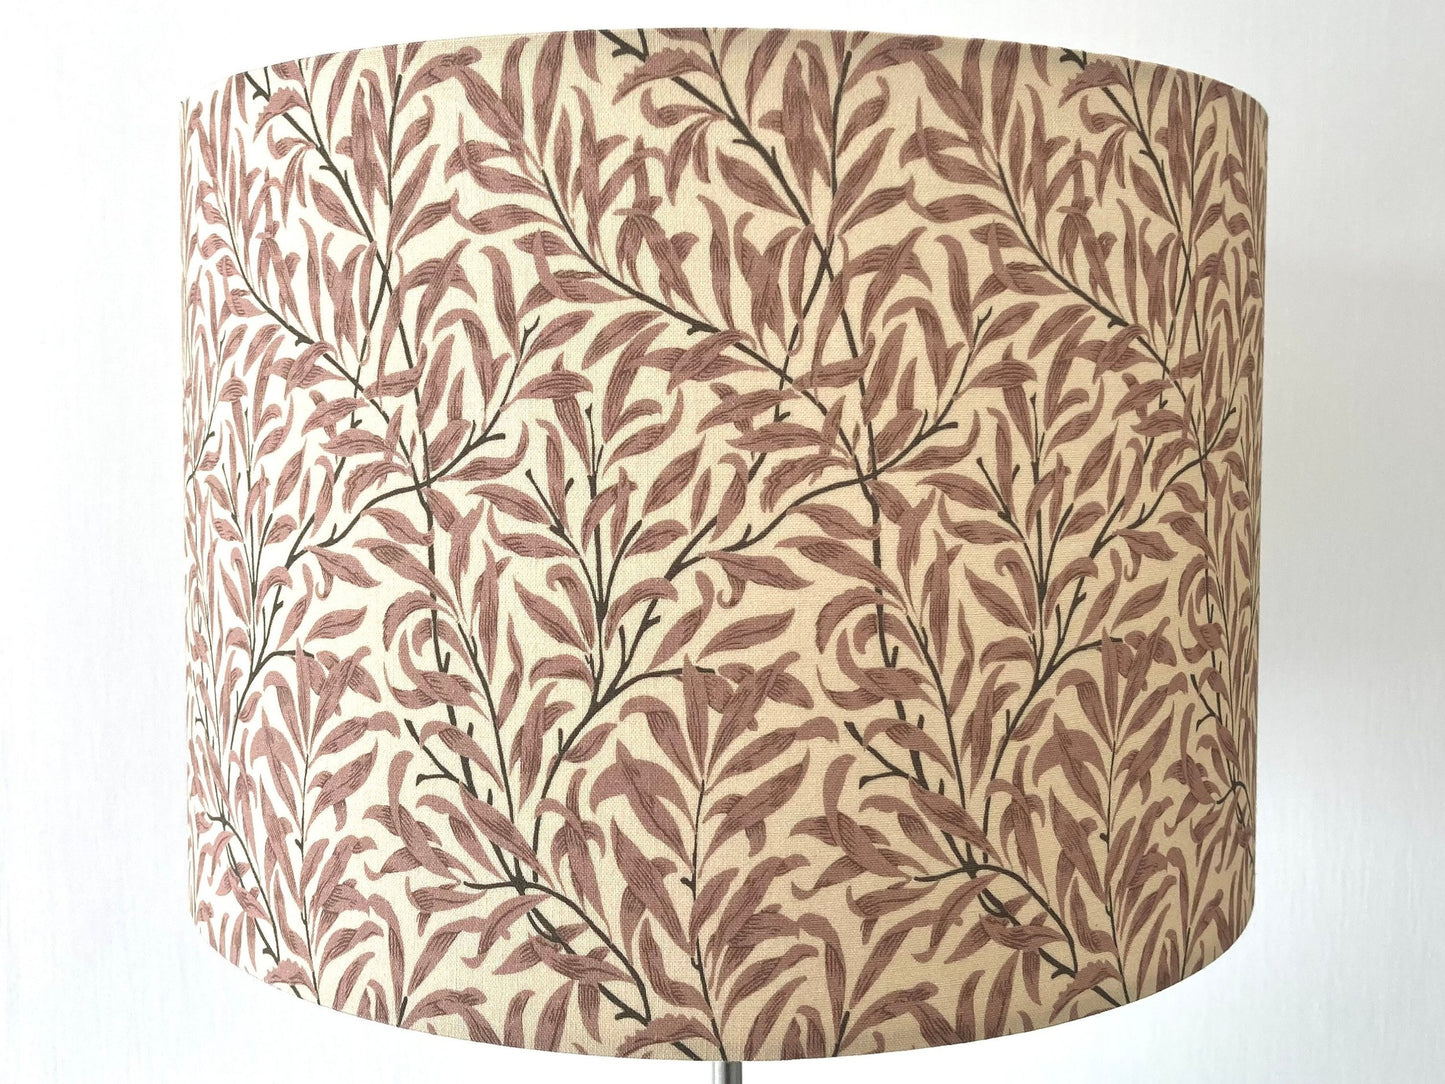 William Morris Beige Pink Willow Bough Fabric Lampshade for Table Lamps or Ceiling Lights